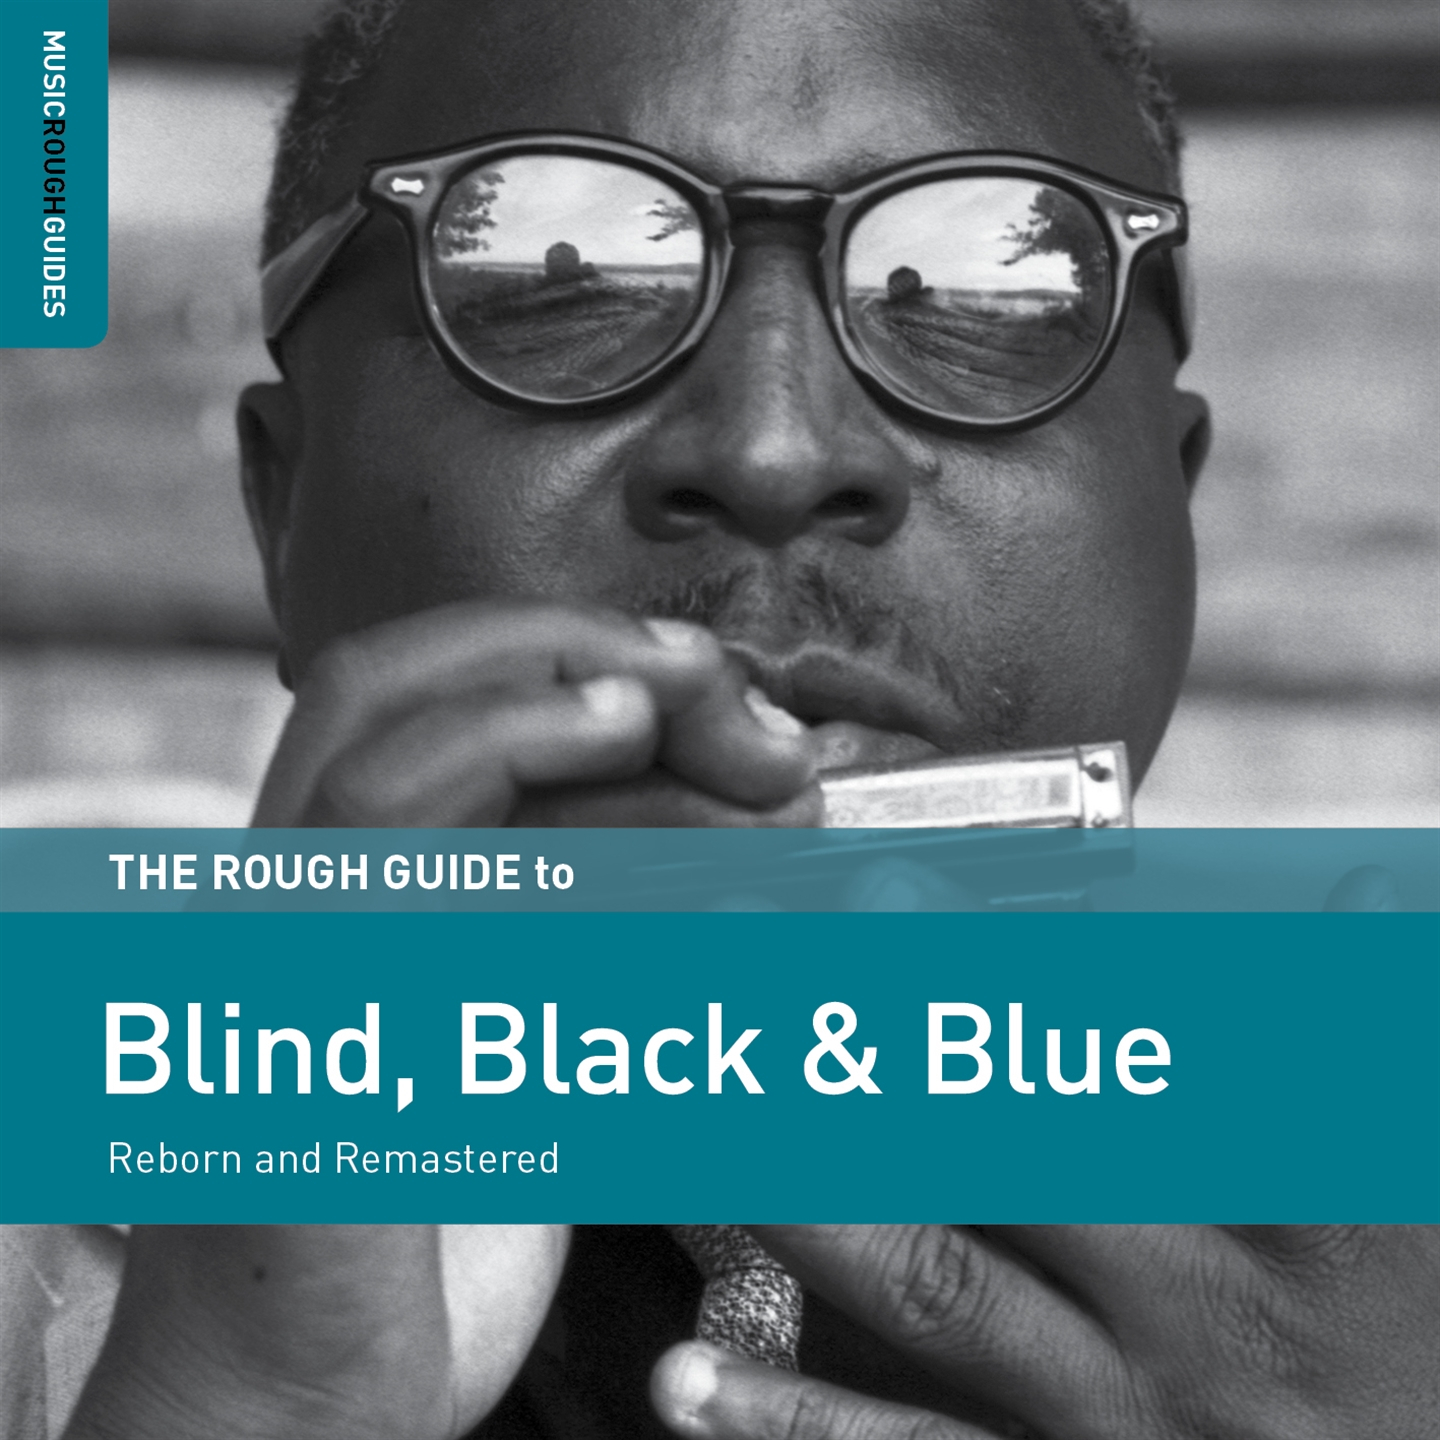 THE ROUGH GUIDE TO BLIND, BLACK & BLUE